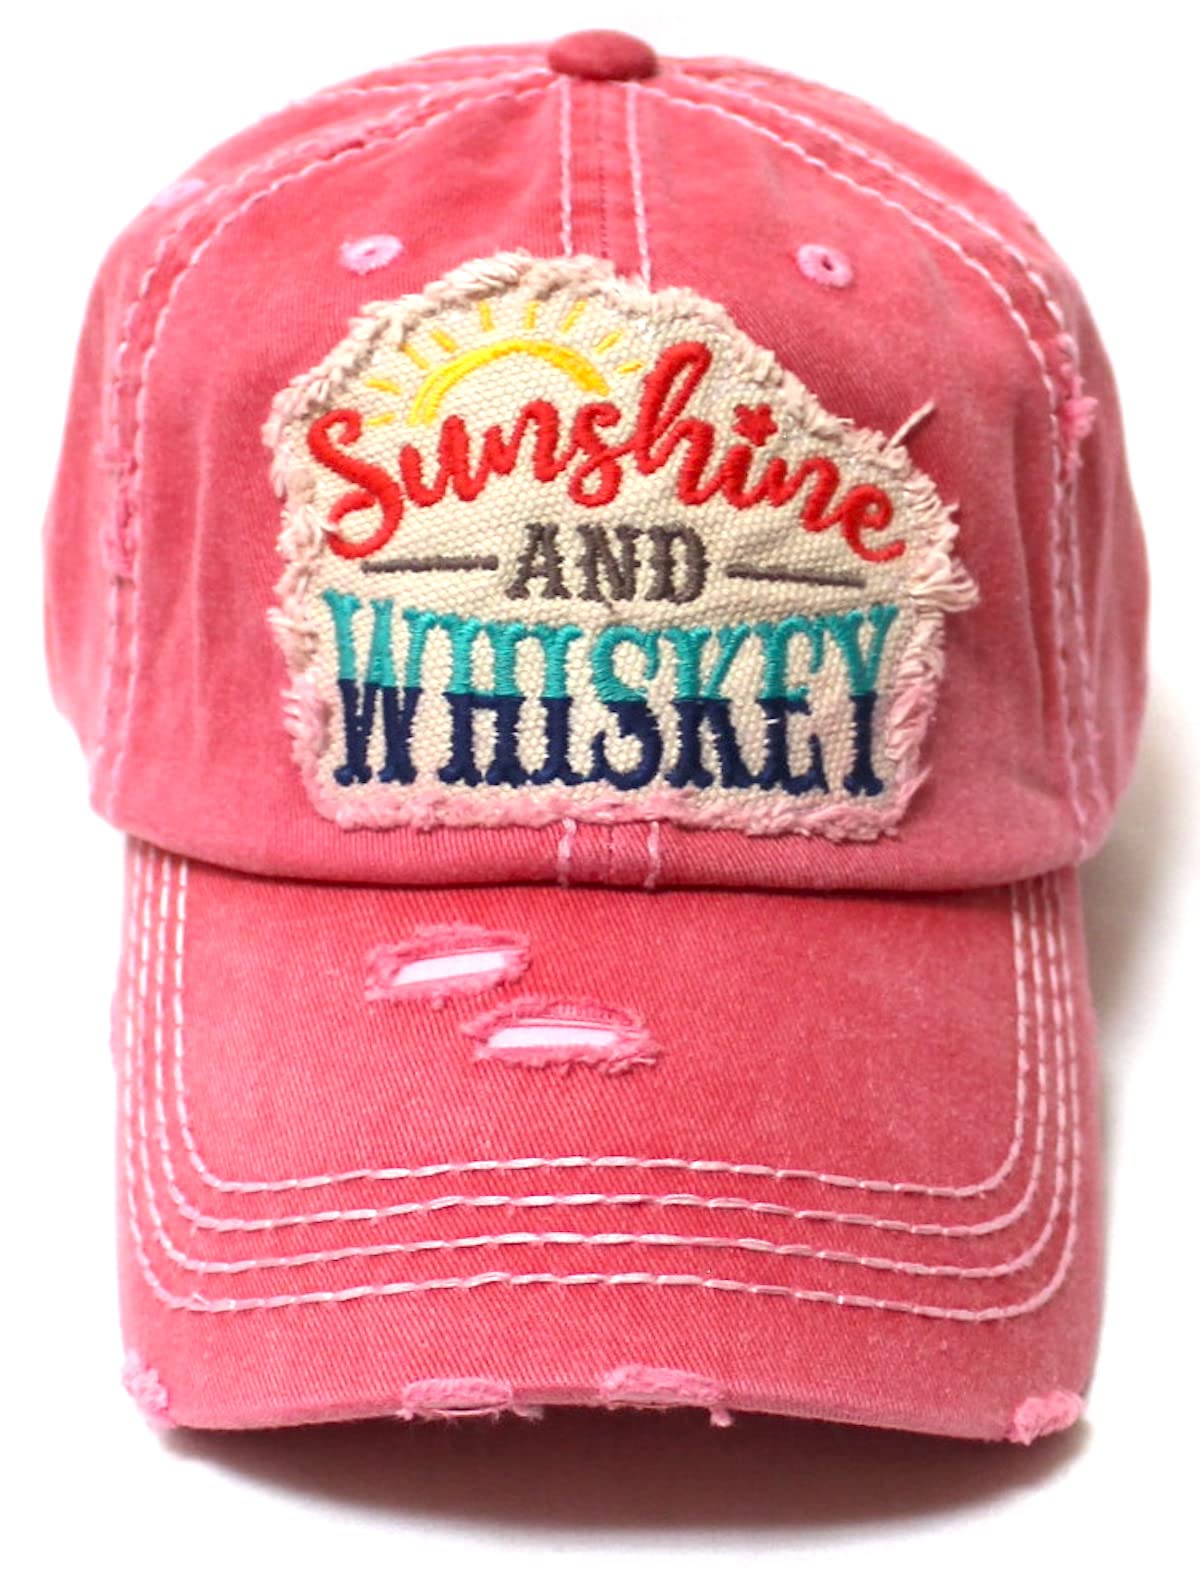 CAPS 'N VINTAGE Women's Sunshine and Whiskey Patch Embroidery Monogram Hat